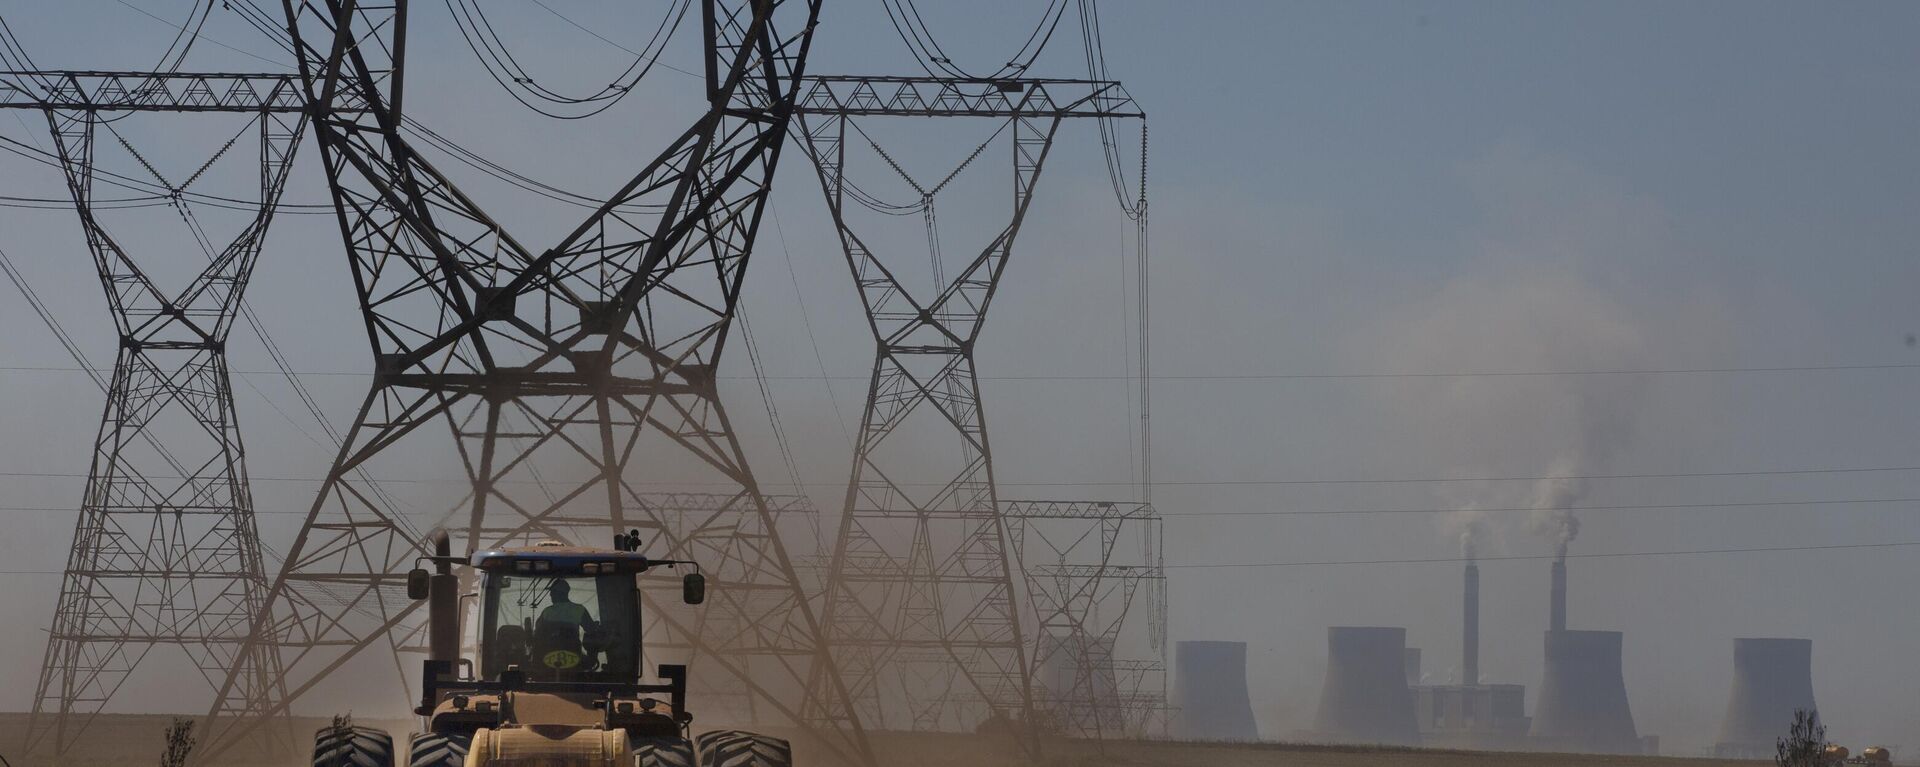 The land is ploughed under electrical pylons leading from a coal-powered electricity generating plant east of Johannesburg, Thursday, Nov. 17 2022. - Sputnik International, 1920, 03.12.2022